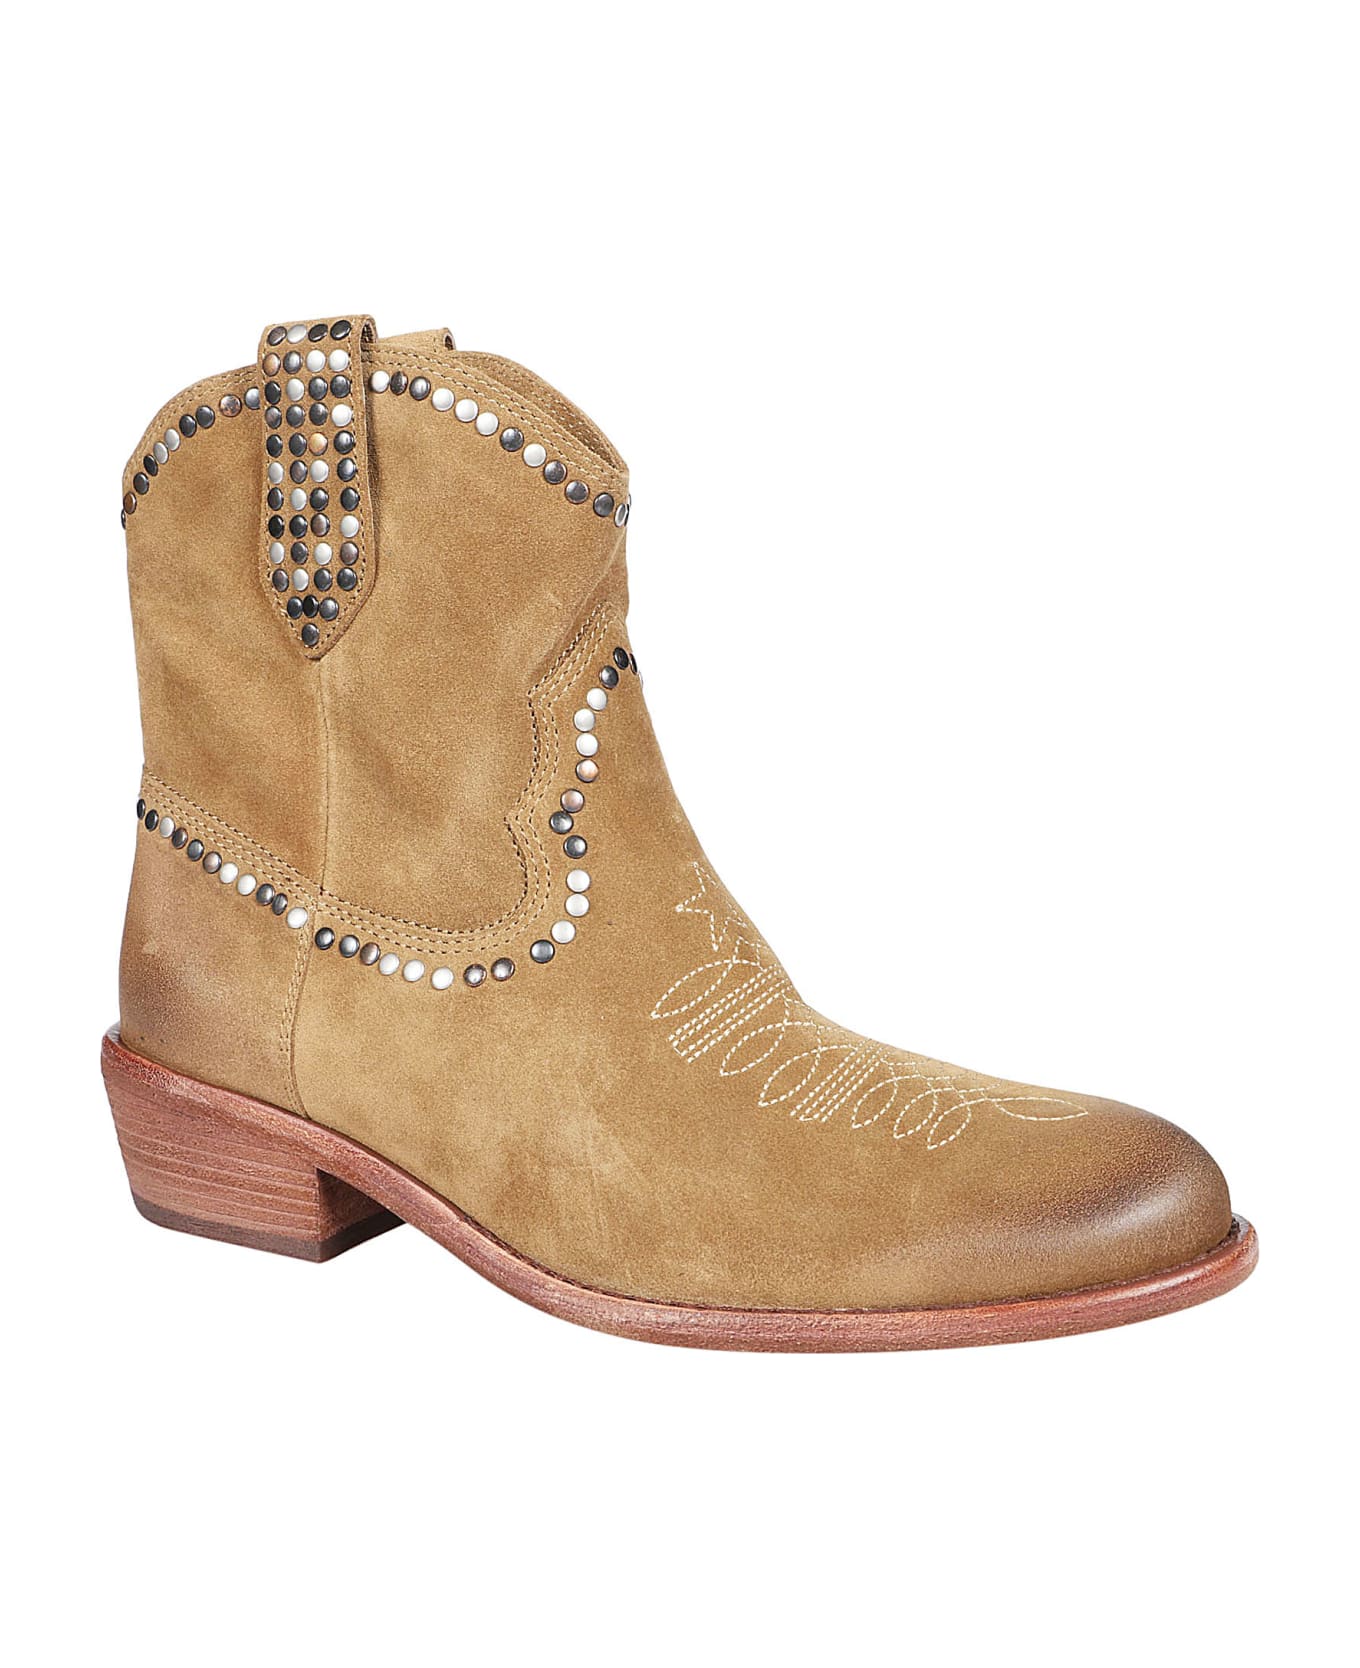 Ash Gipsy Texan Ankle Boots - Antilope